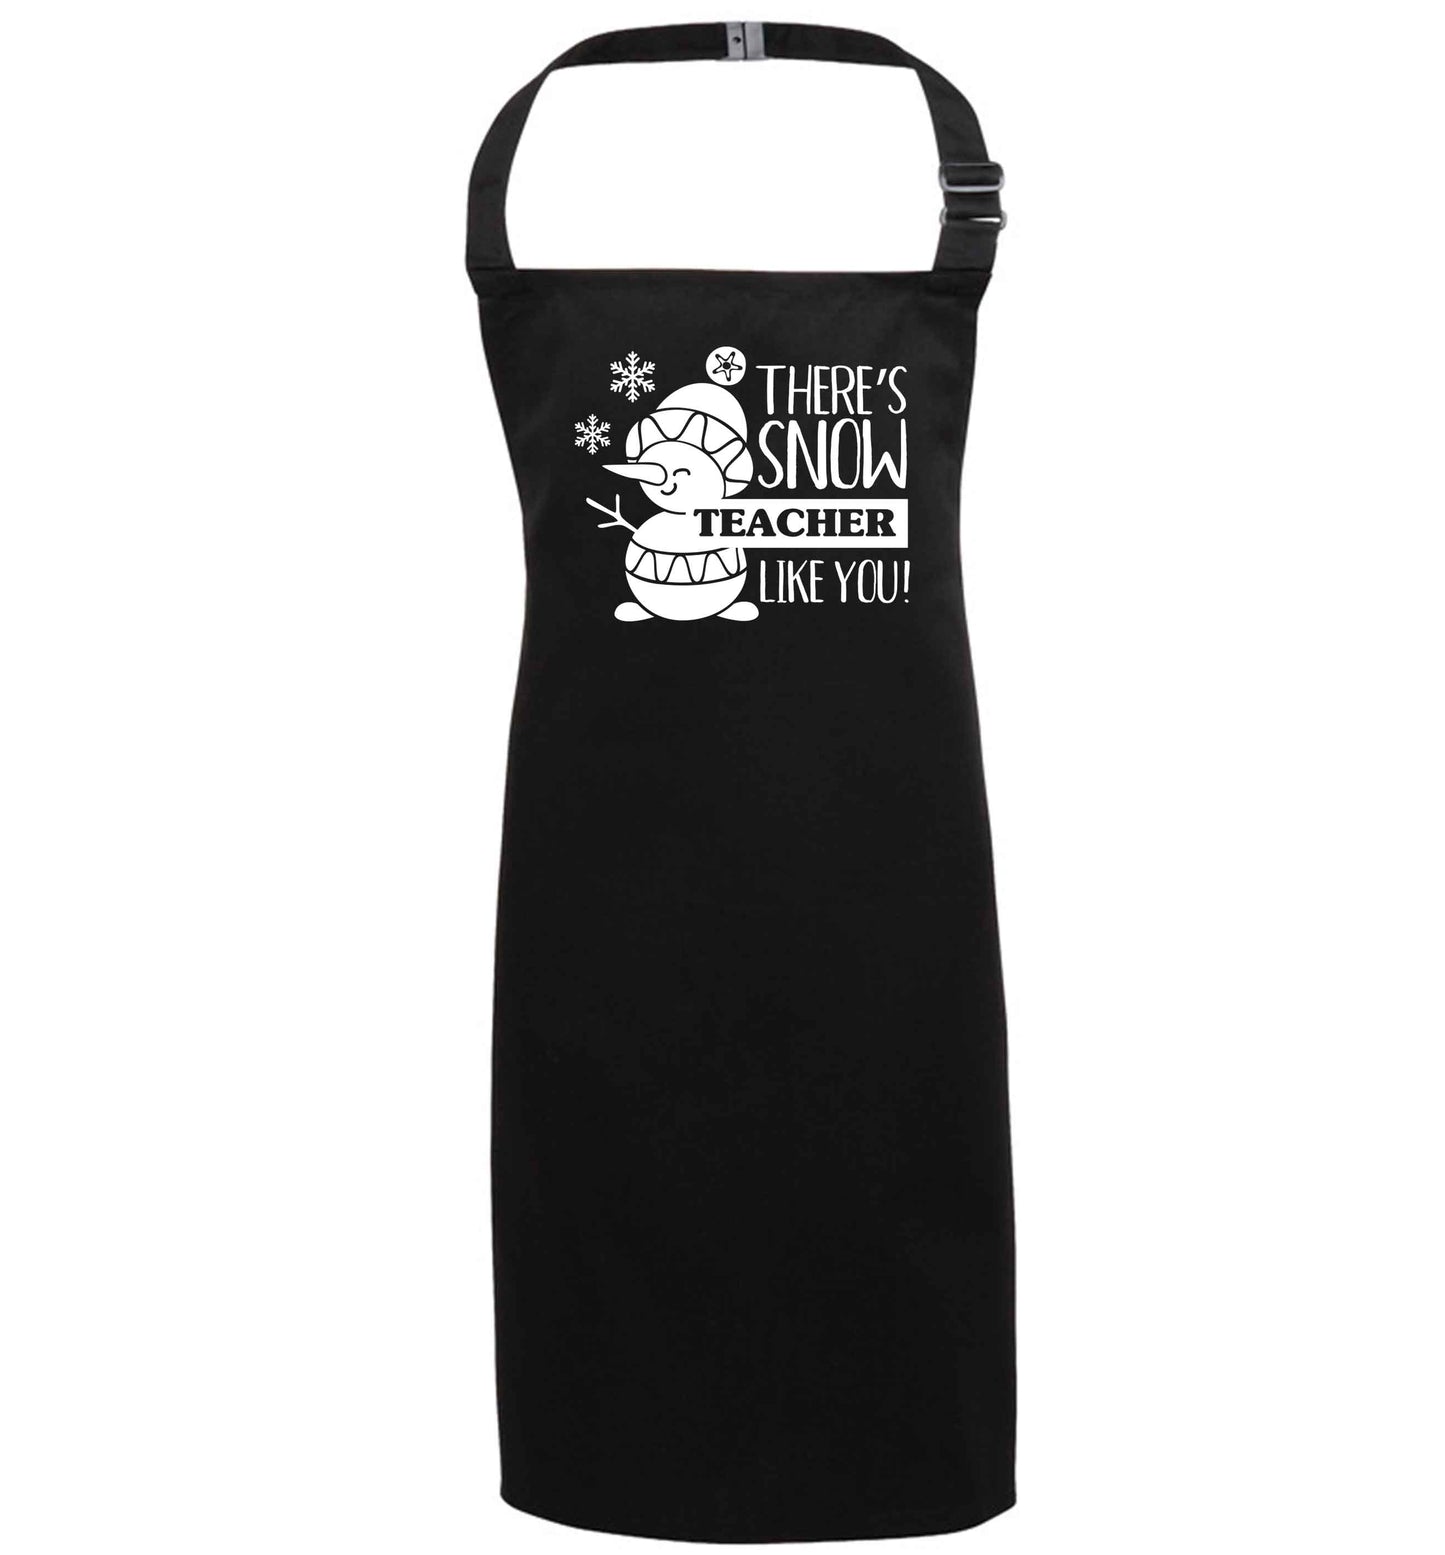 There's snow teacher like you black apron 7-10 years